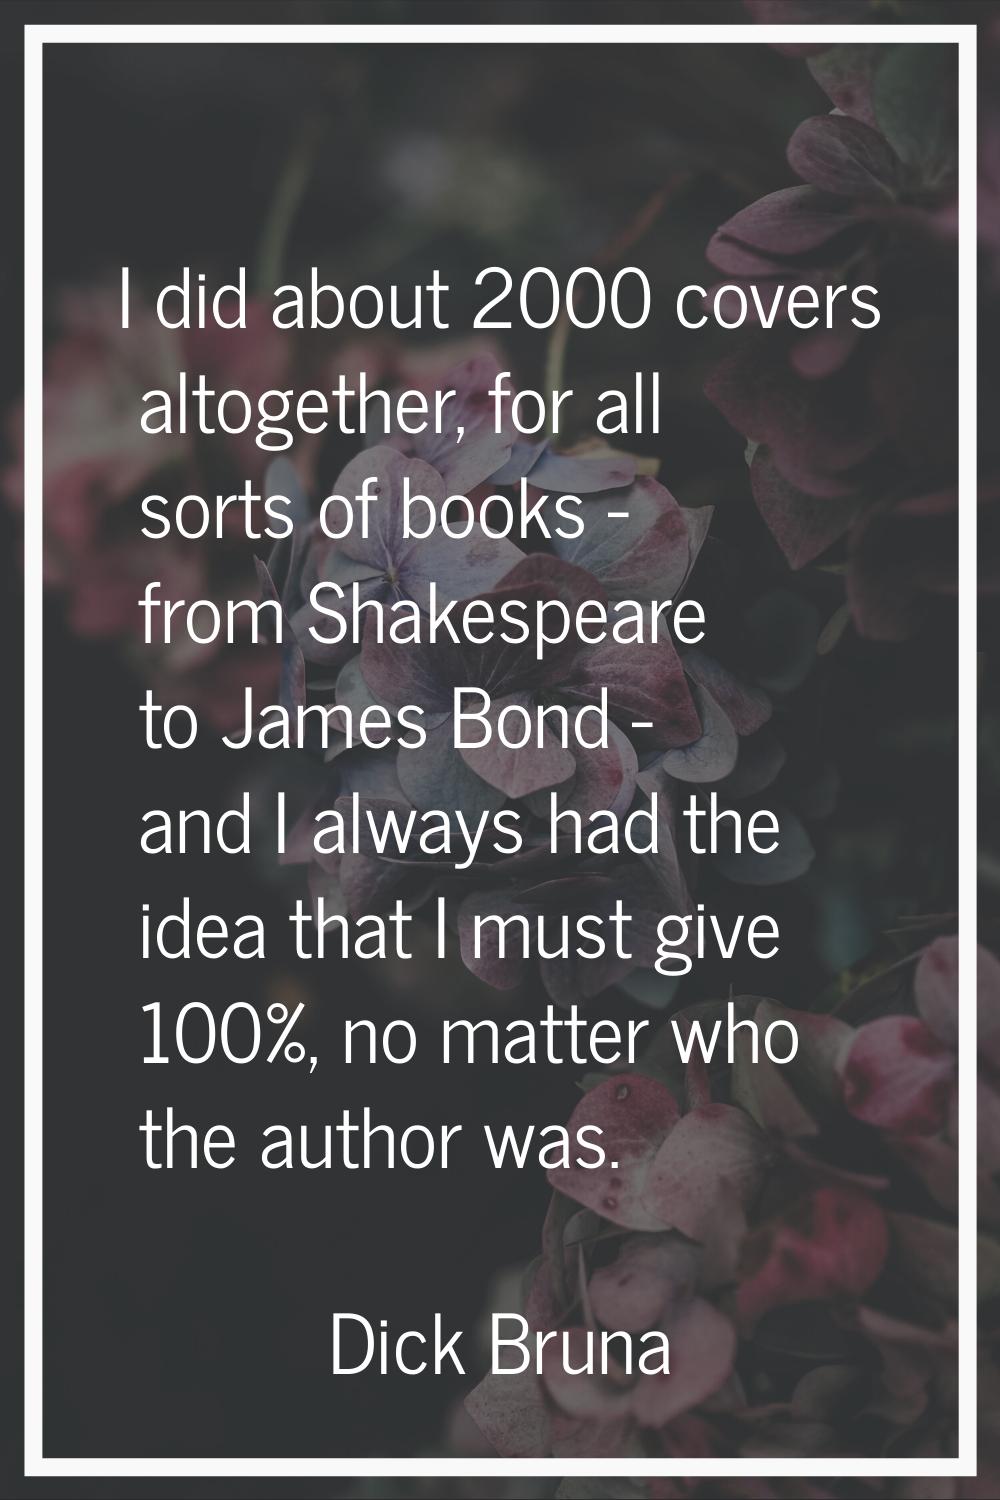 I did about 2000 covers altogether, for all sorts of books - from Shakespeare to James Bond - and I